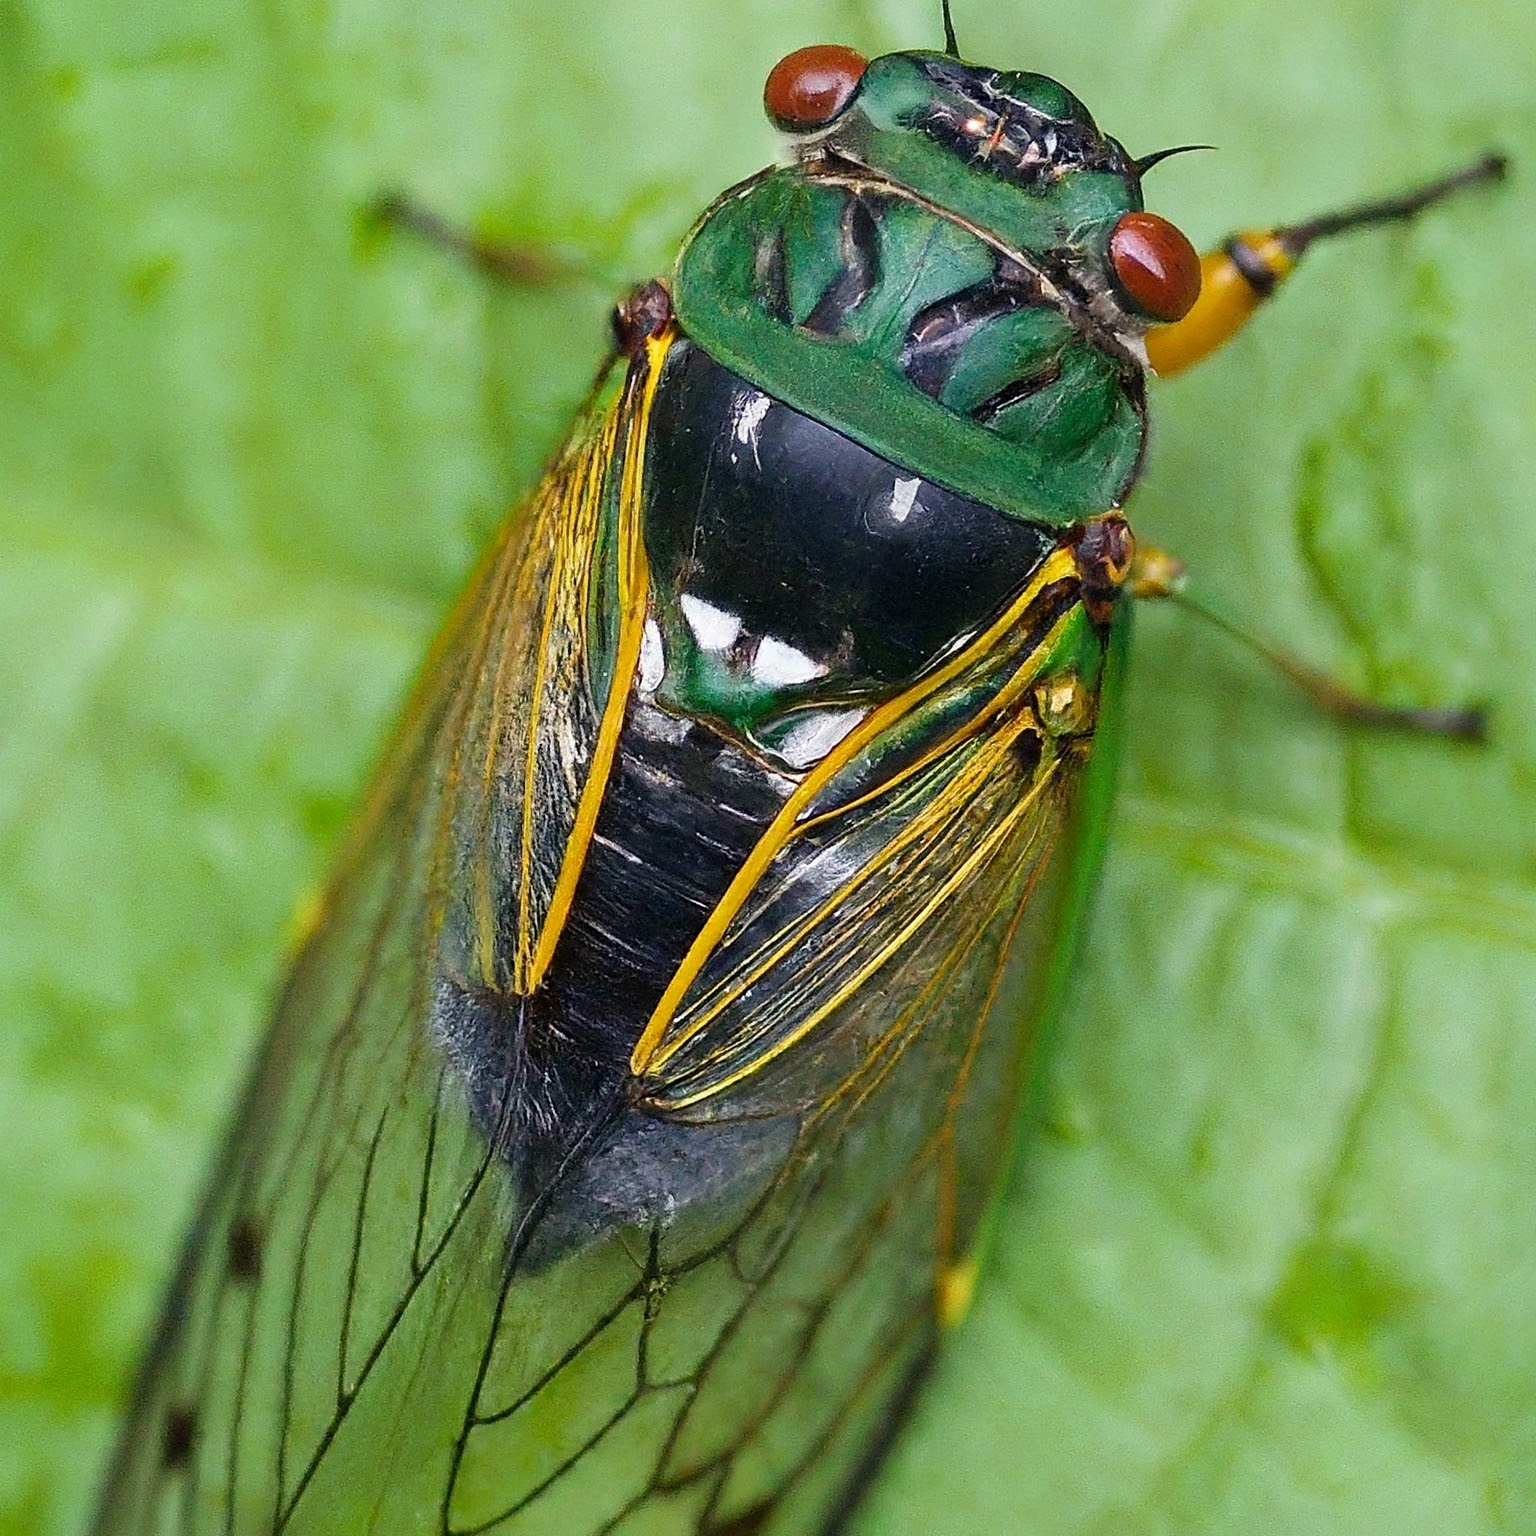 Cicada Frenzy: How Brood X Disrupts the Food Chain